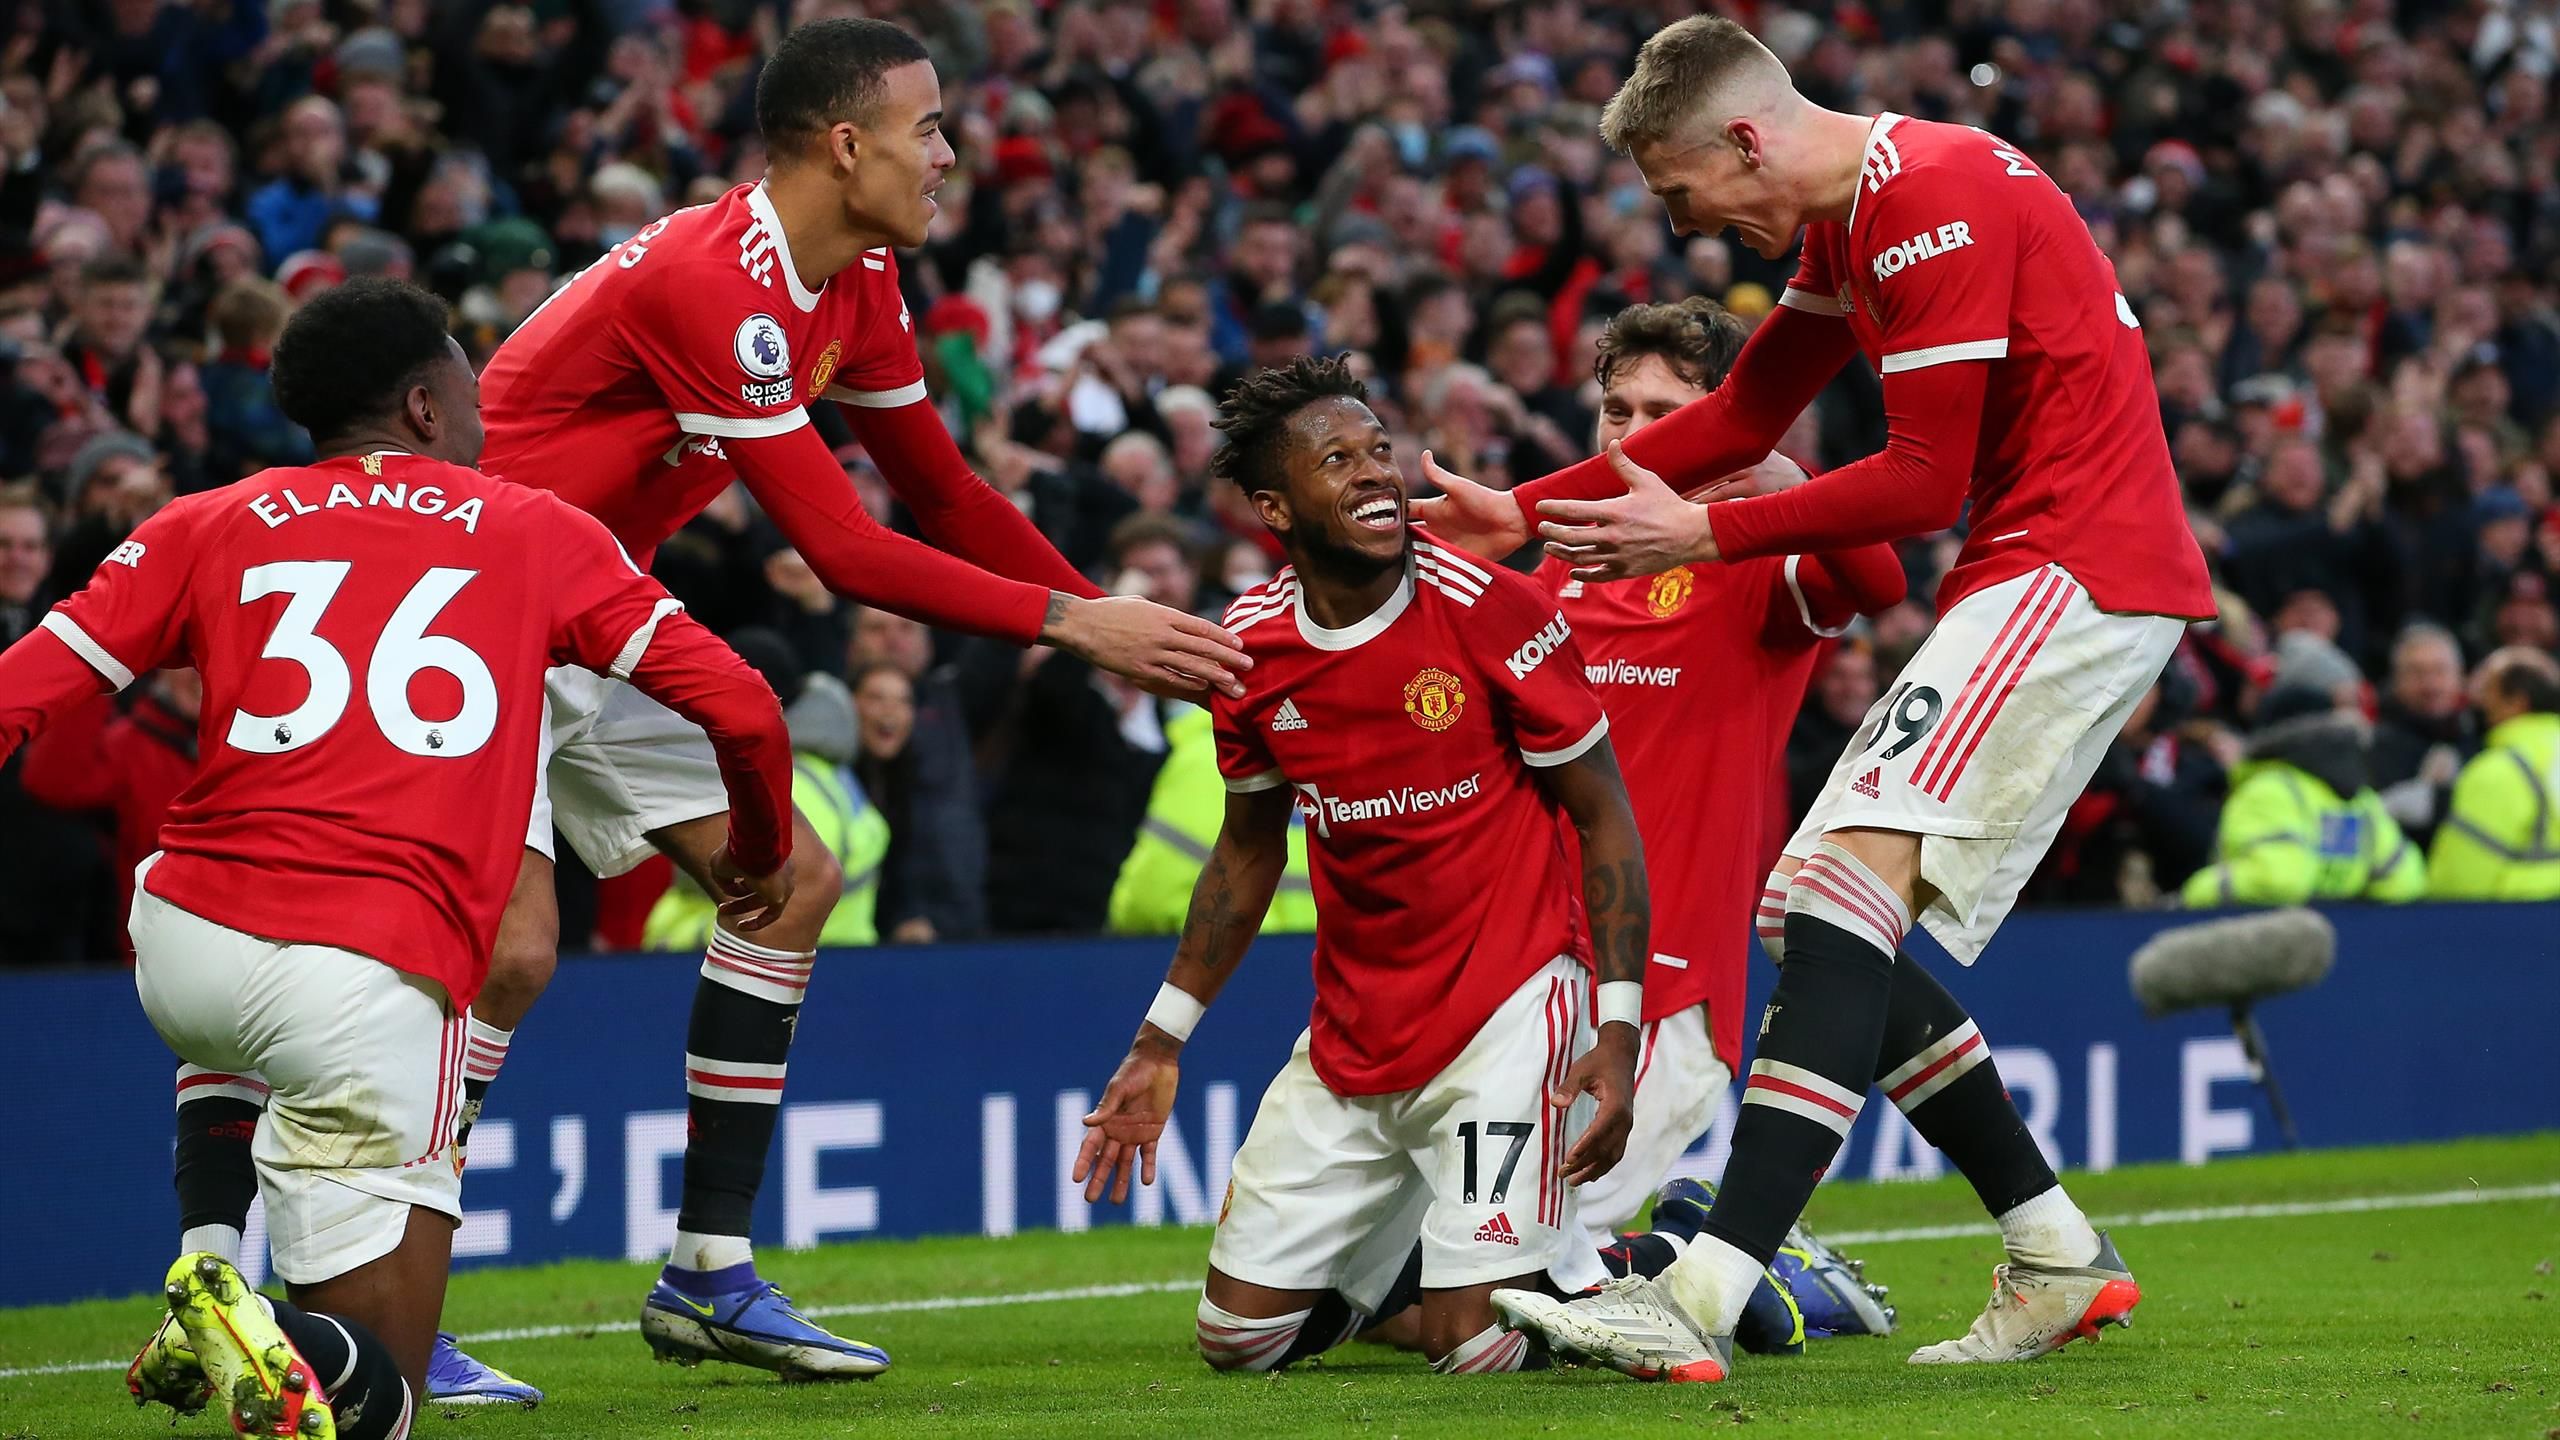 Premier League result - Late Fred goal gives Ralf Rangnick and Manchester United victory over Crystal Palace